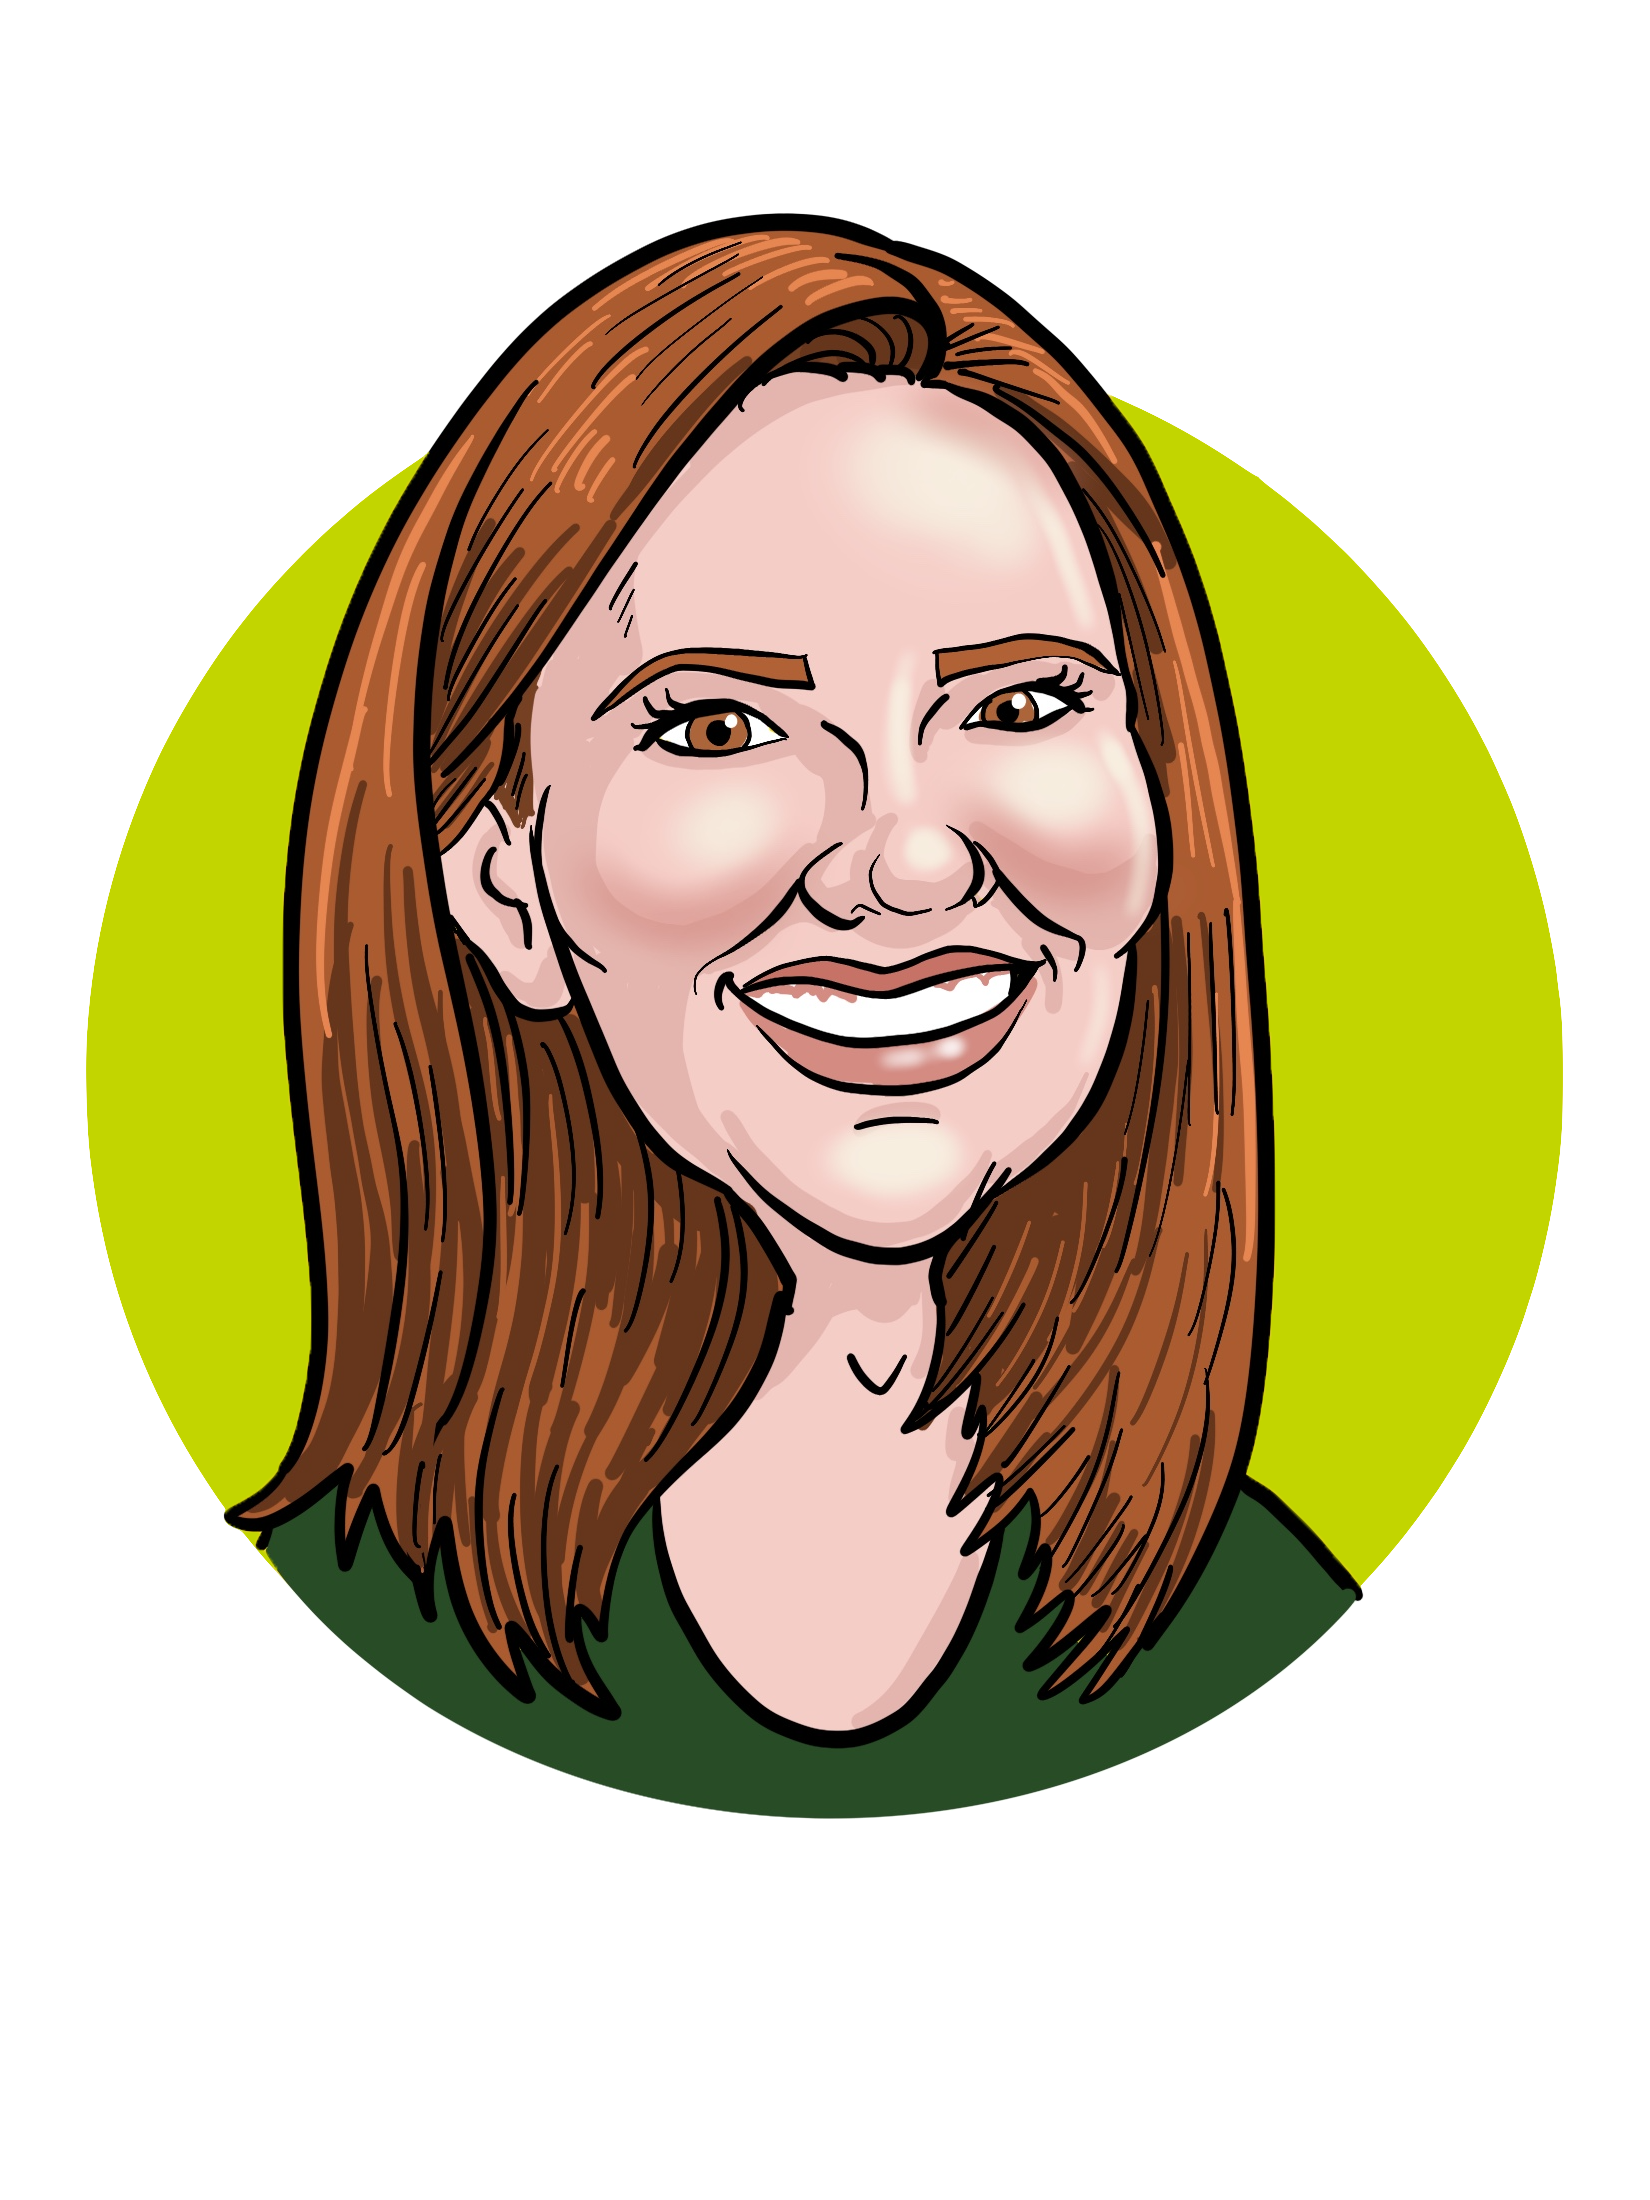 a caricature-style drawing of Stacy Eitniear's headshot